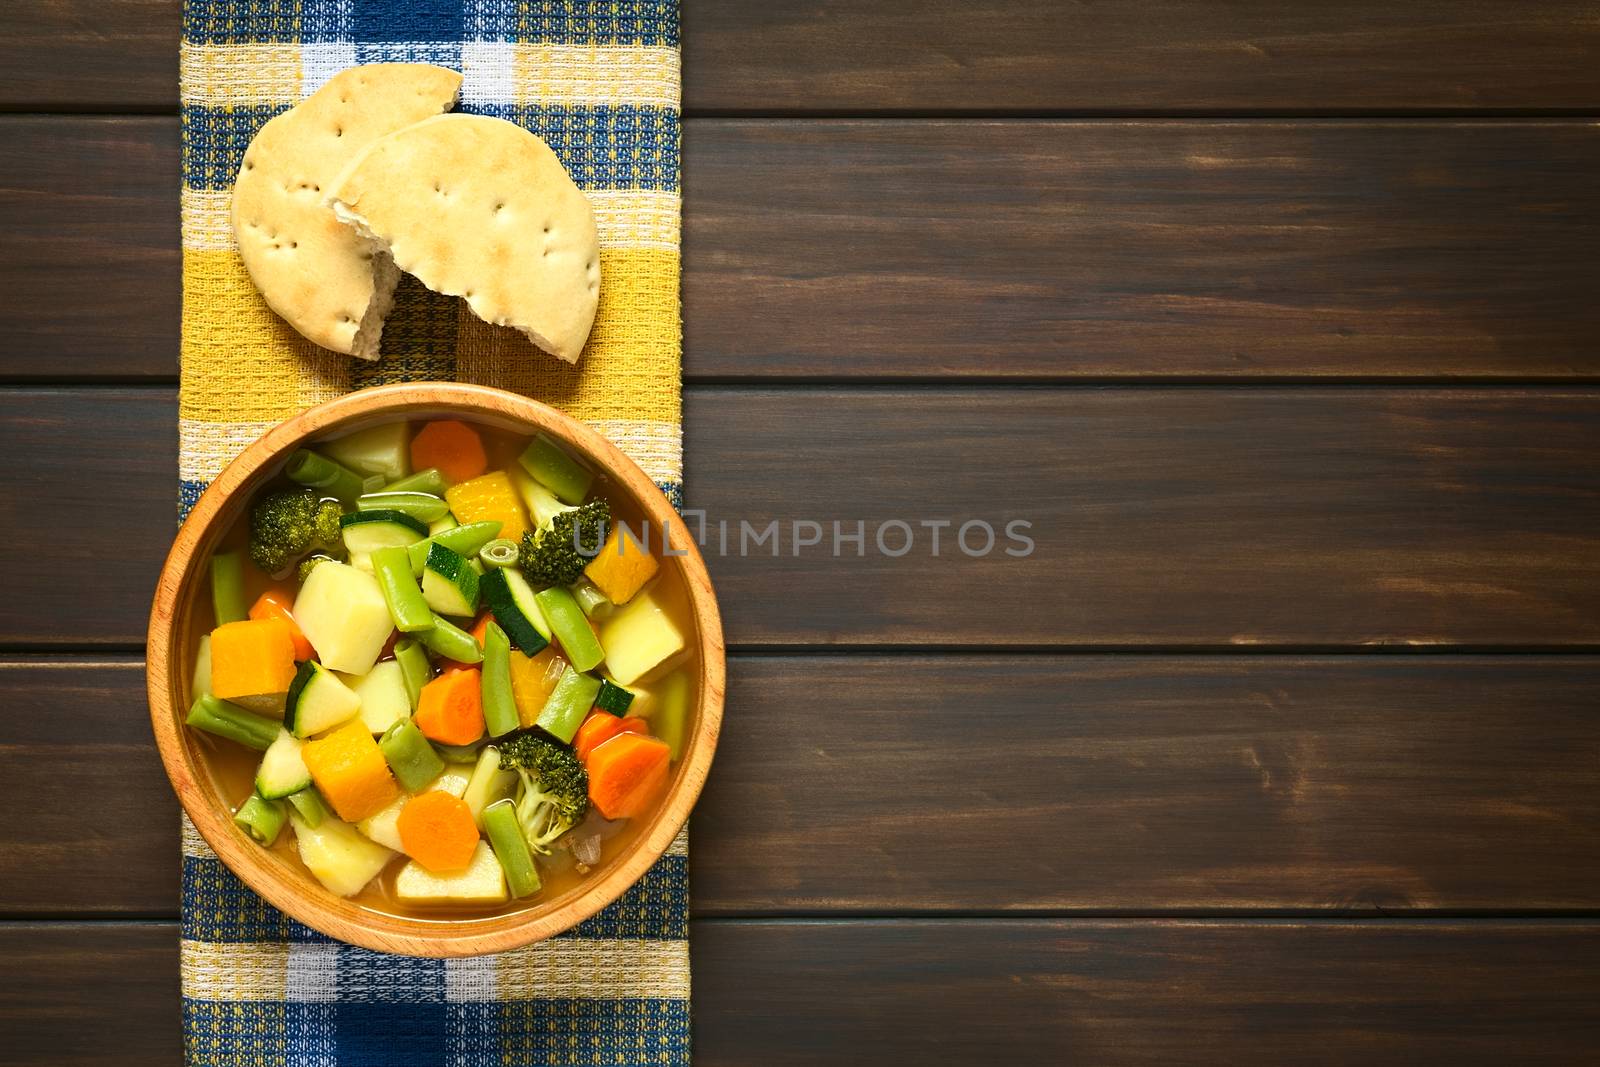 Wooden bowl of vegetable soup made of zucchini, green bean, carrot, broccoli, potato and pumpkin with a bun on kitchen towel, photographed on dark wood with natural light